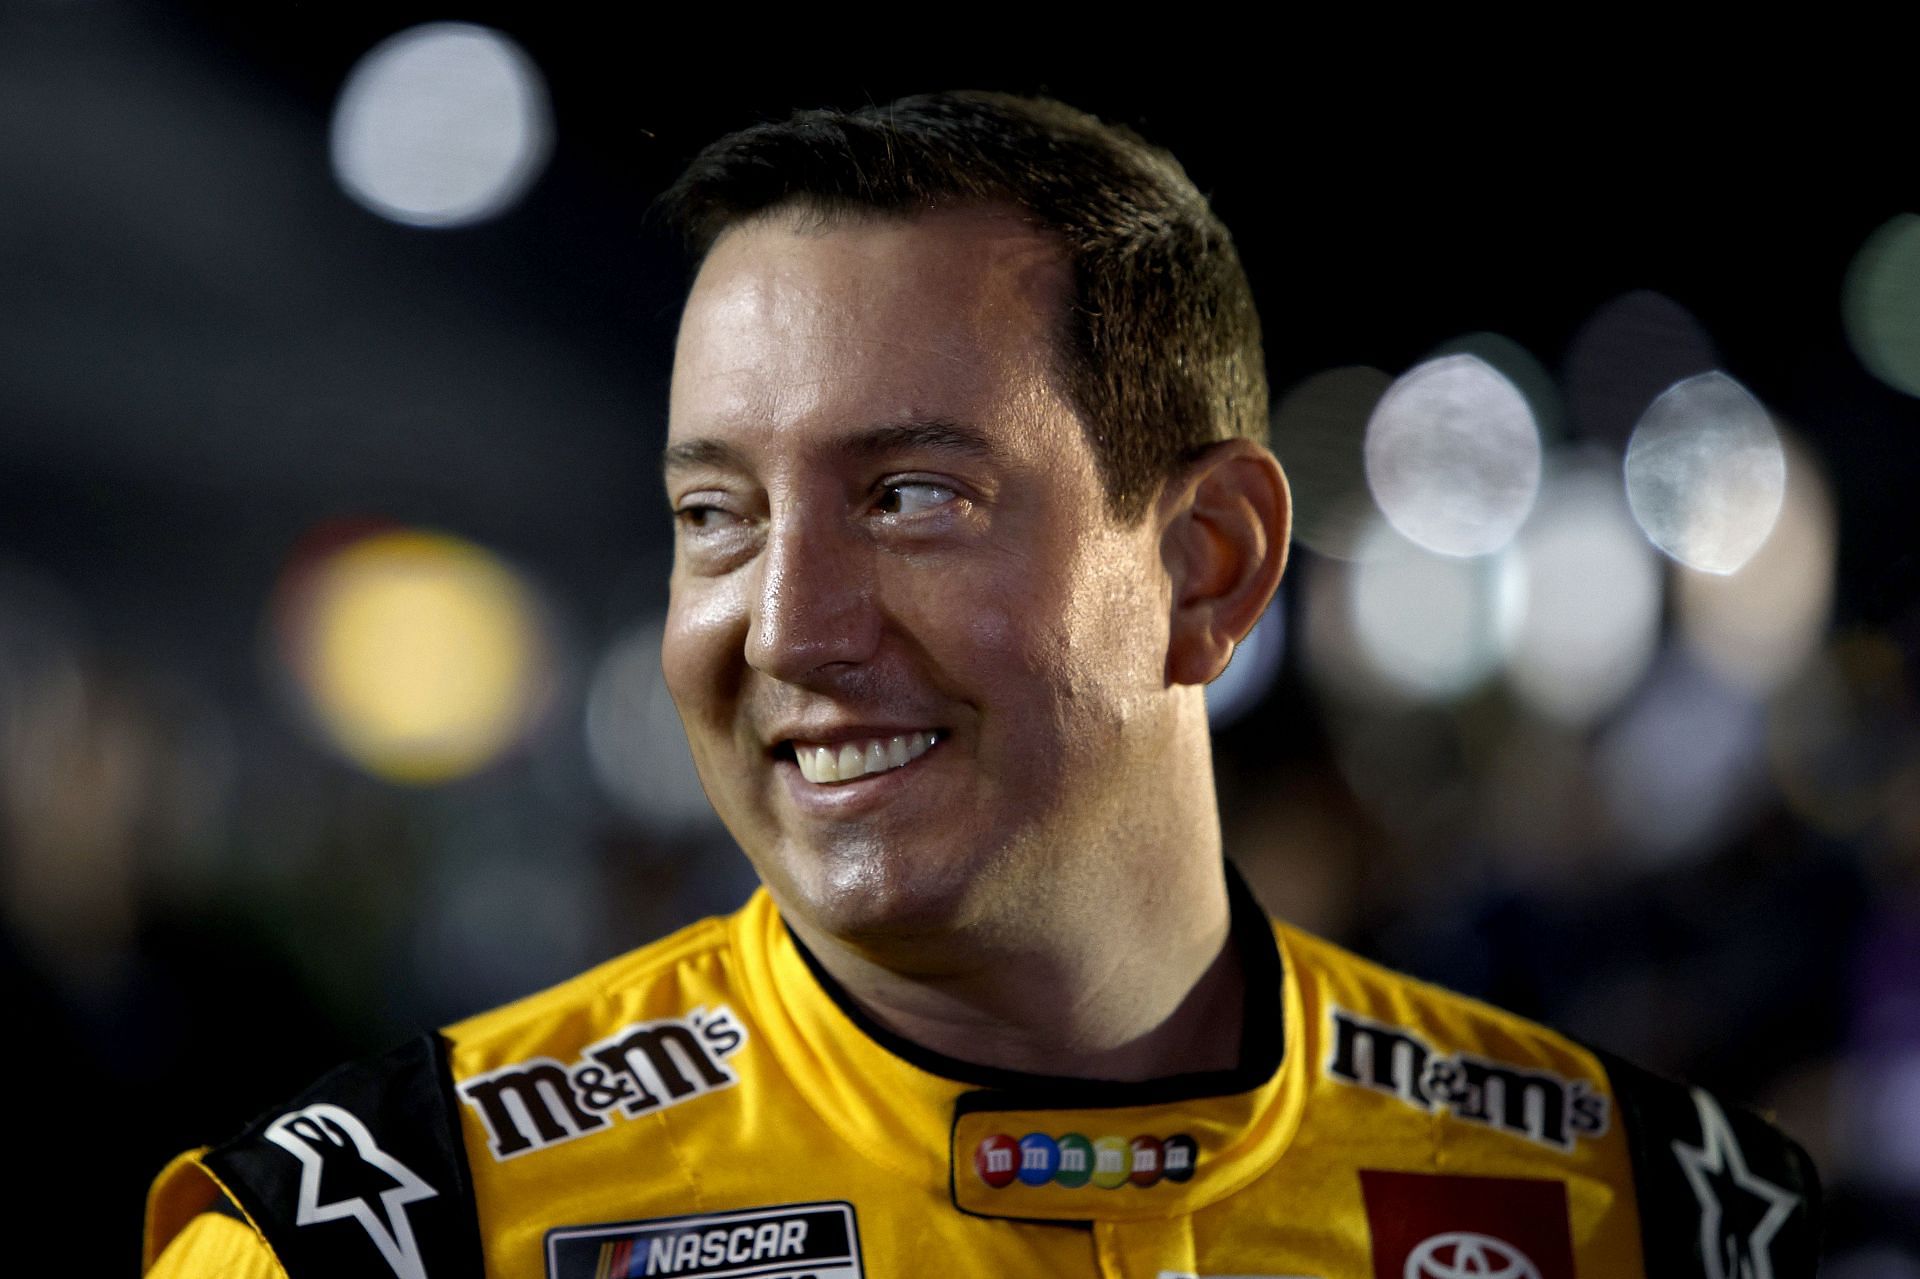 Kyle Busch during qualifying for the NASCAR Cup Series 64th Annual Daytona 500